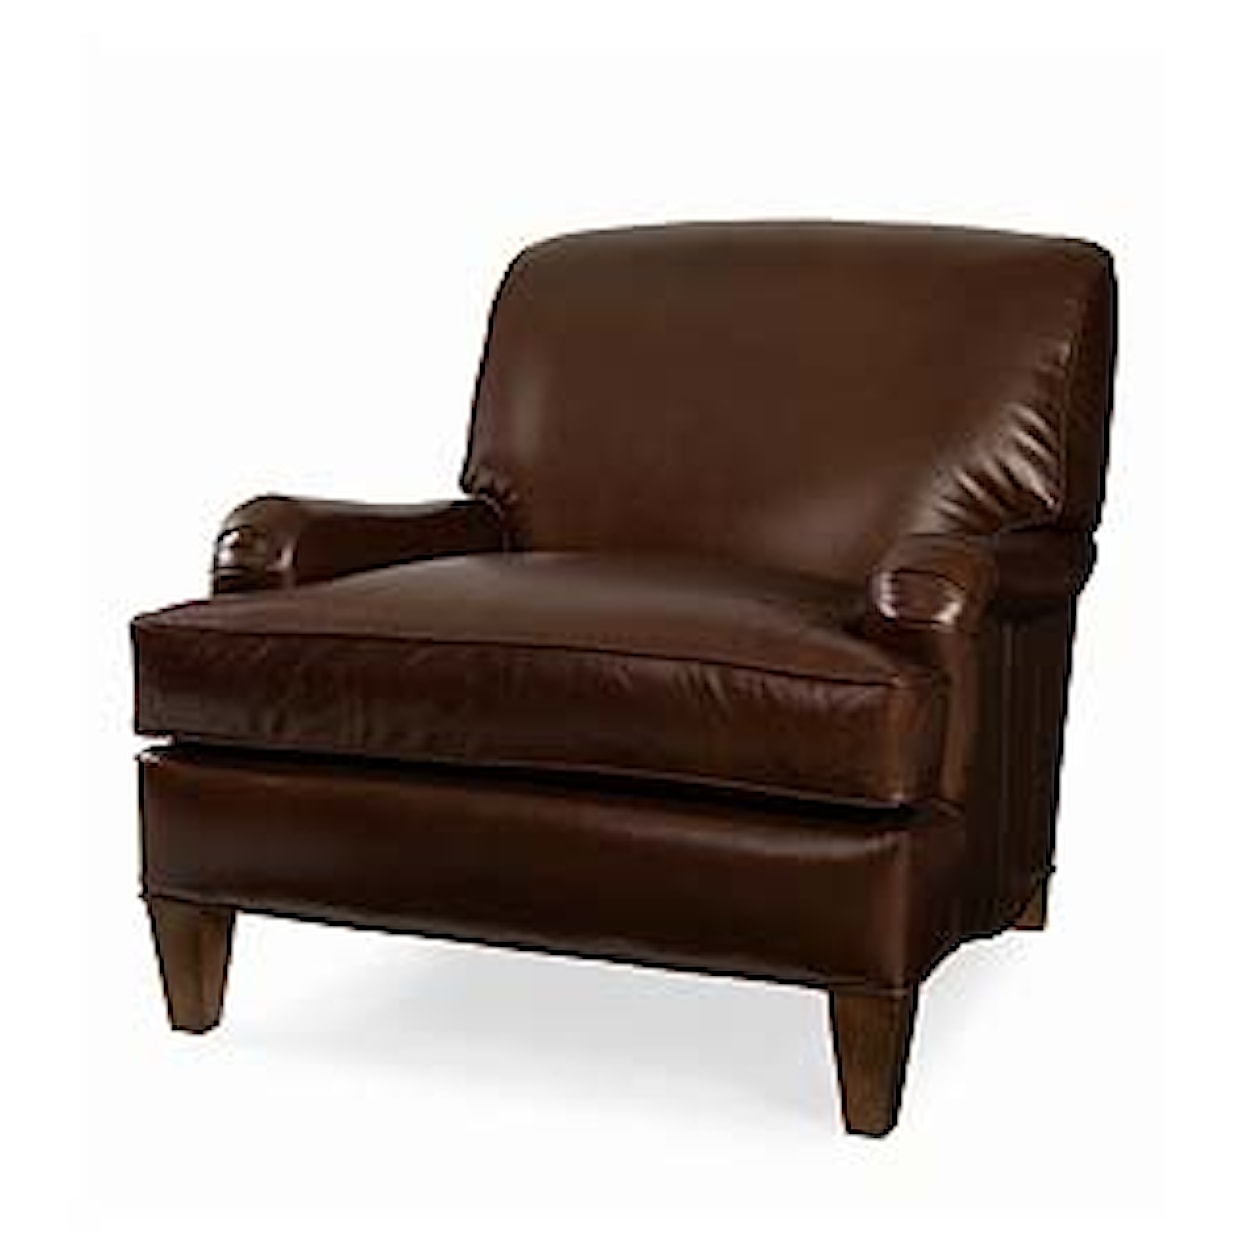 C.R. Laine Russel Russel Chair